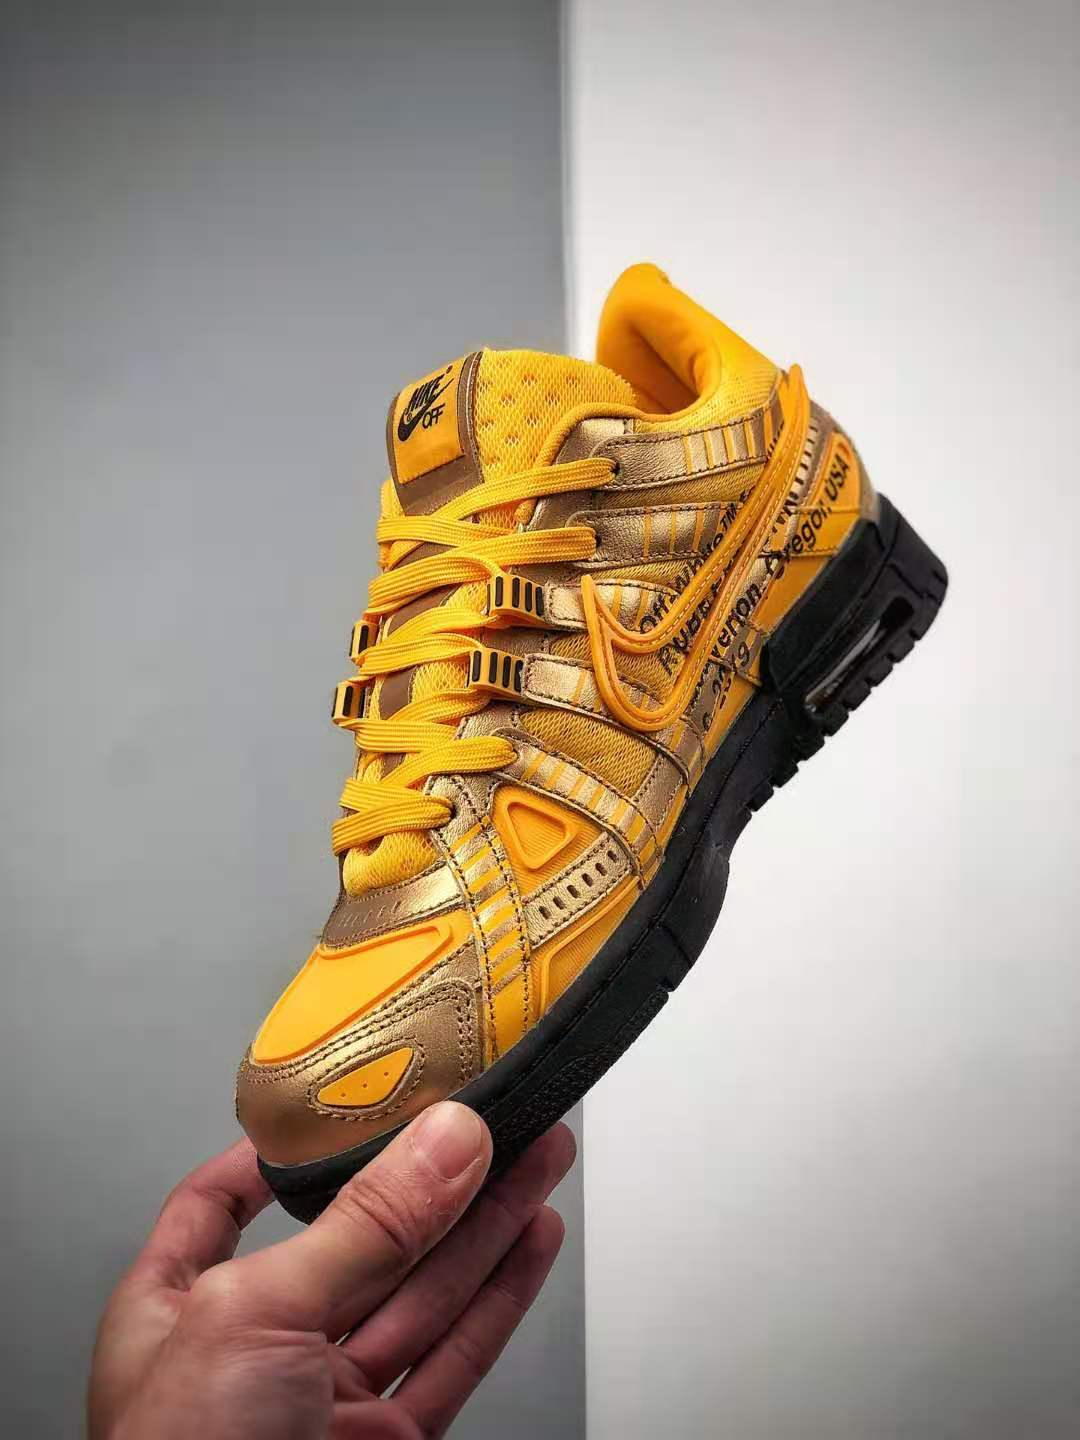 Nike Off-White x Air Rubber Dunk 'University Gold' CU6015-700 | Exclusive Release